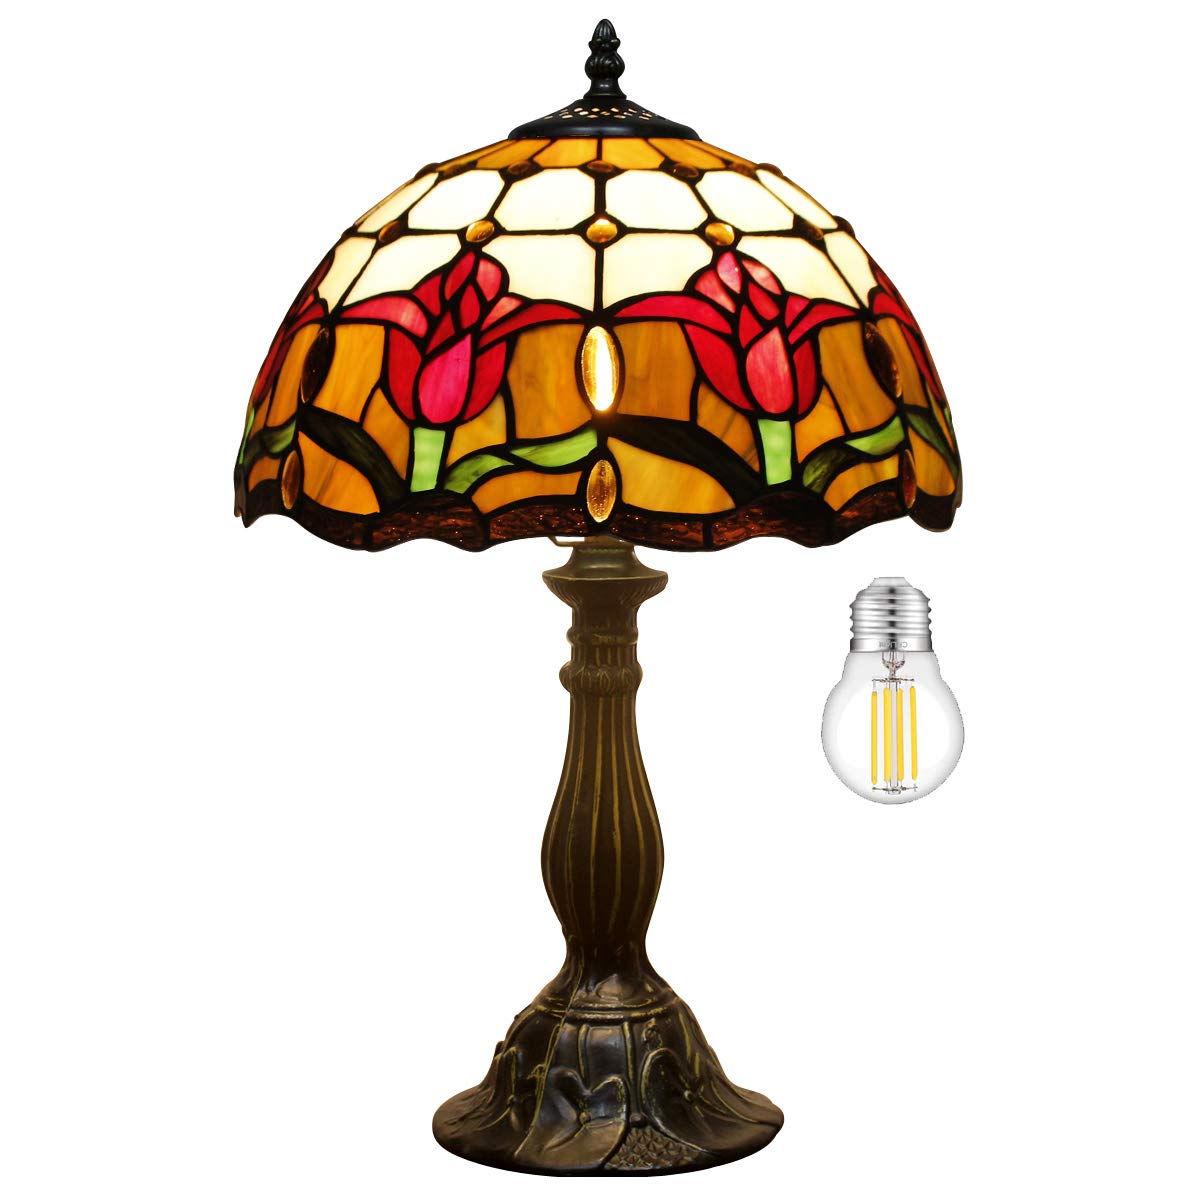 WERFACTORY Tiffany Table Lamp Stained Glass Style Tulip Flower Bedside Reading Desk Light 12X12X18 Inches Decor Nightstand Bedroom Living Room Home...